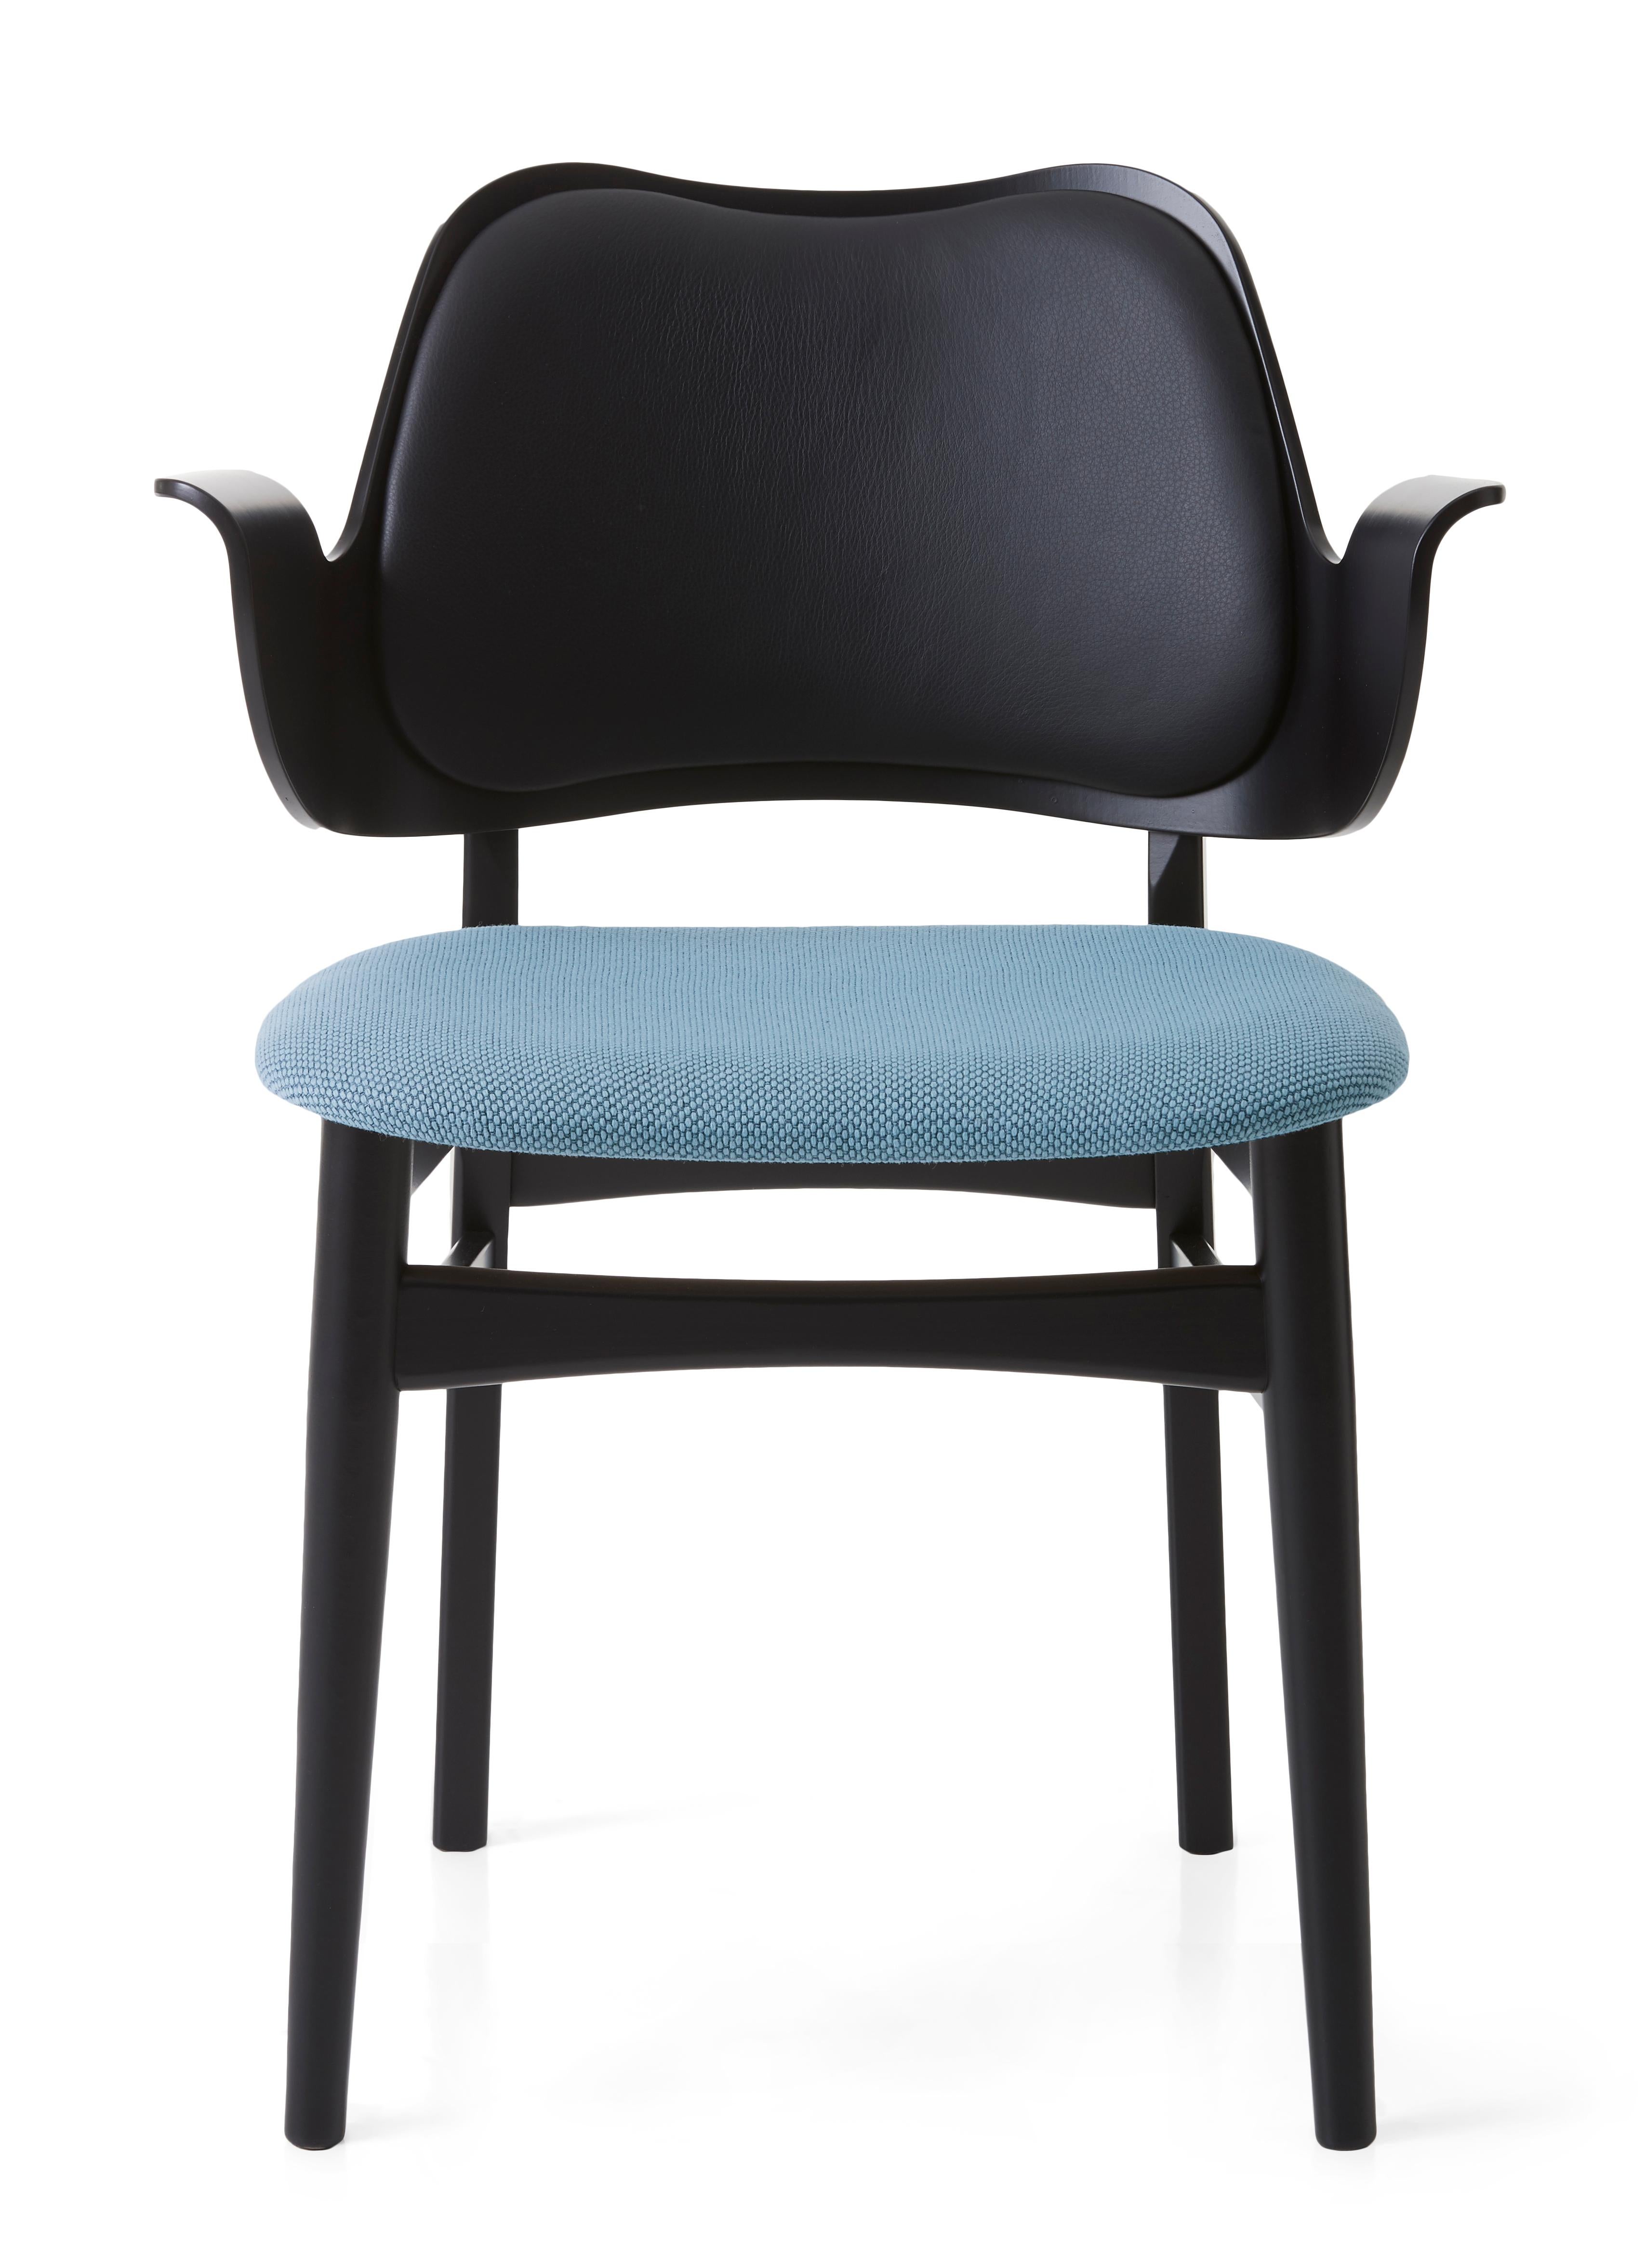 For Sale: Blue (Pres207,Merit011) Gesture Two-Tone Fully Upholstered Chair in Black, by Hans Olsen for Warm Nordic